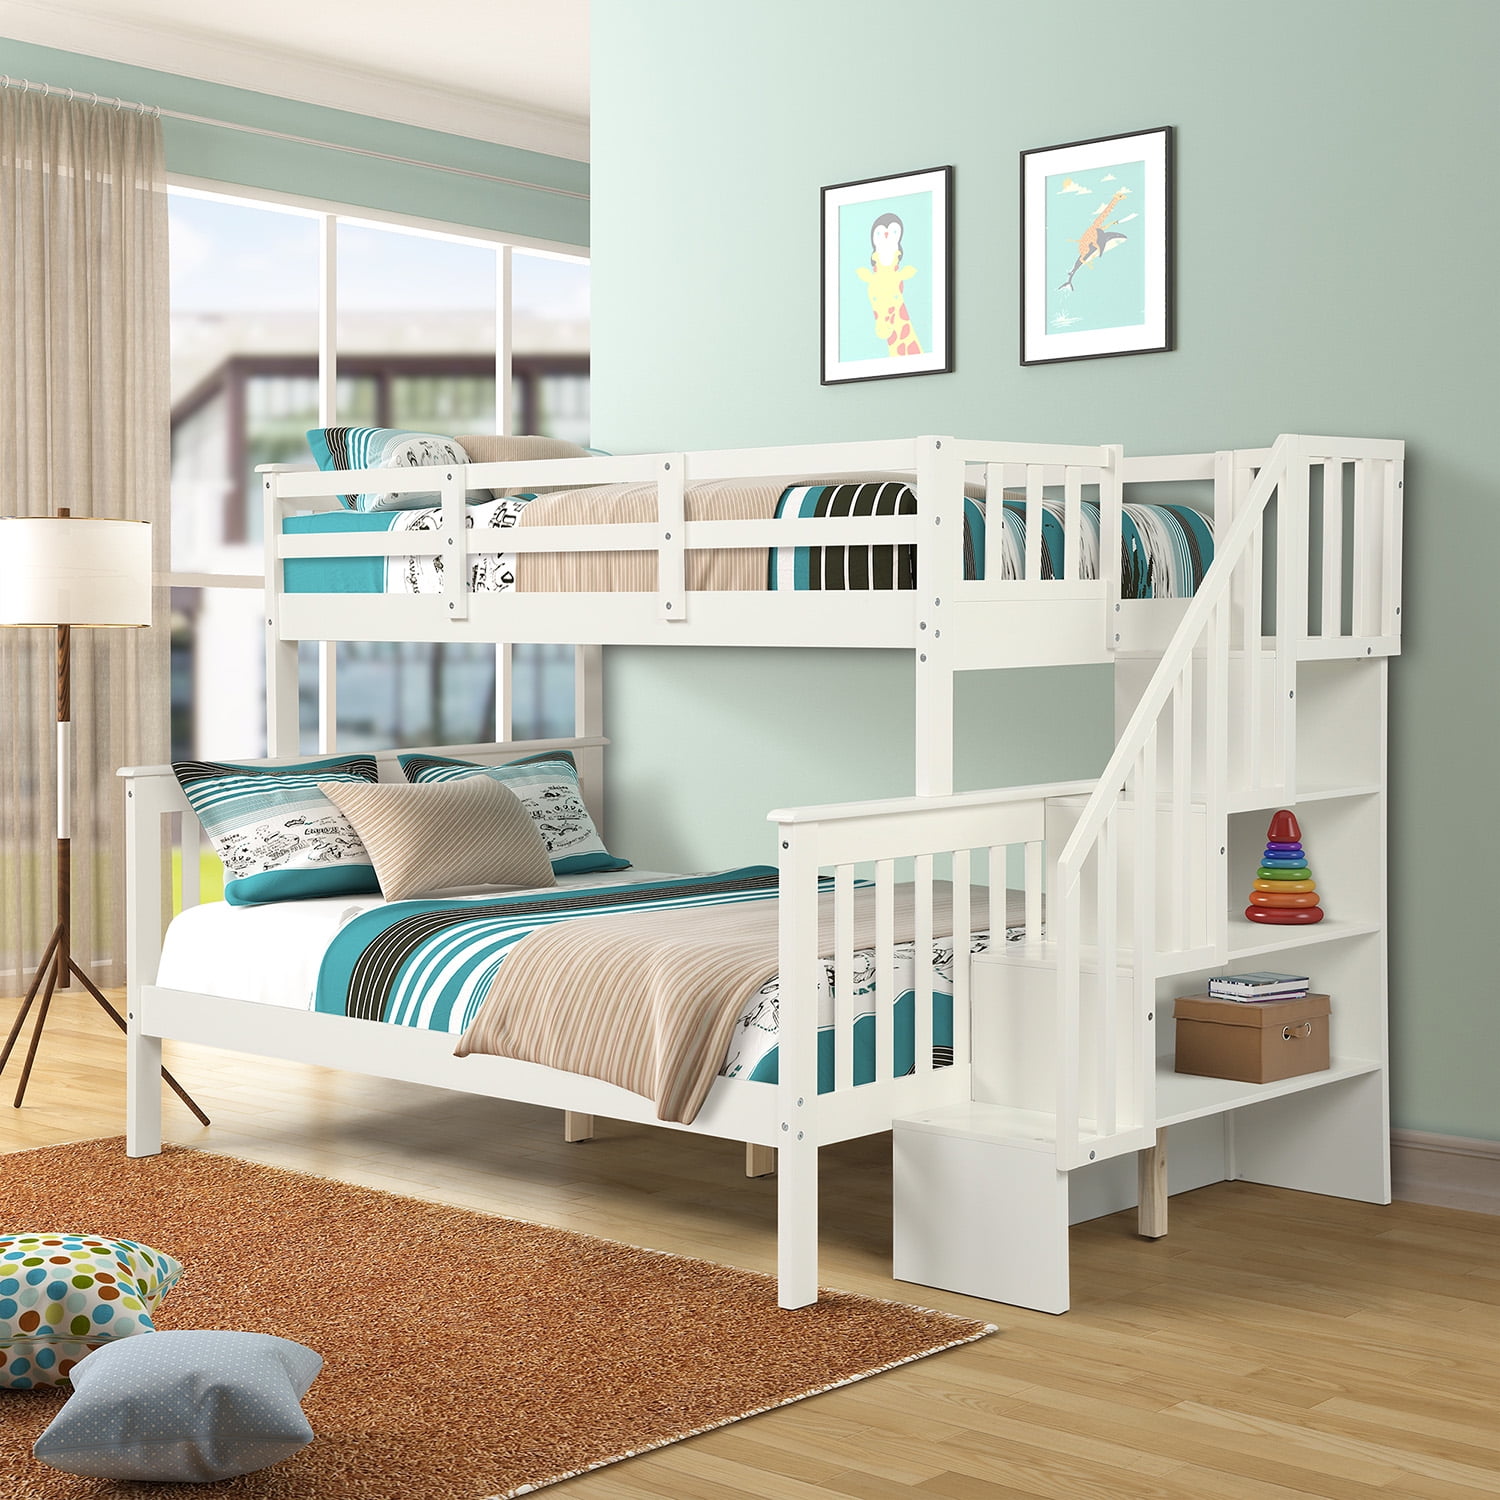 Stairway Bunk Bed Twin Over Full Size, Full Size Bunk Beds Wood